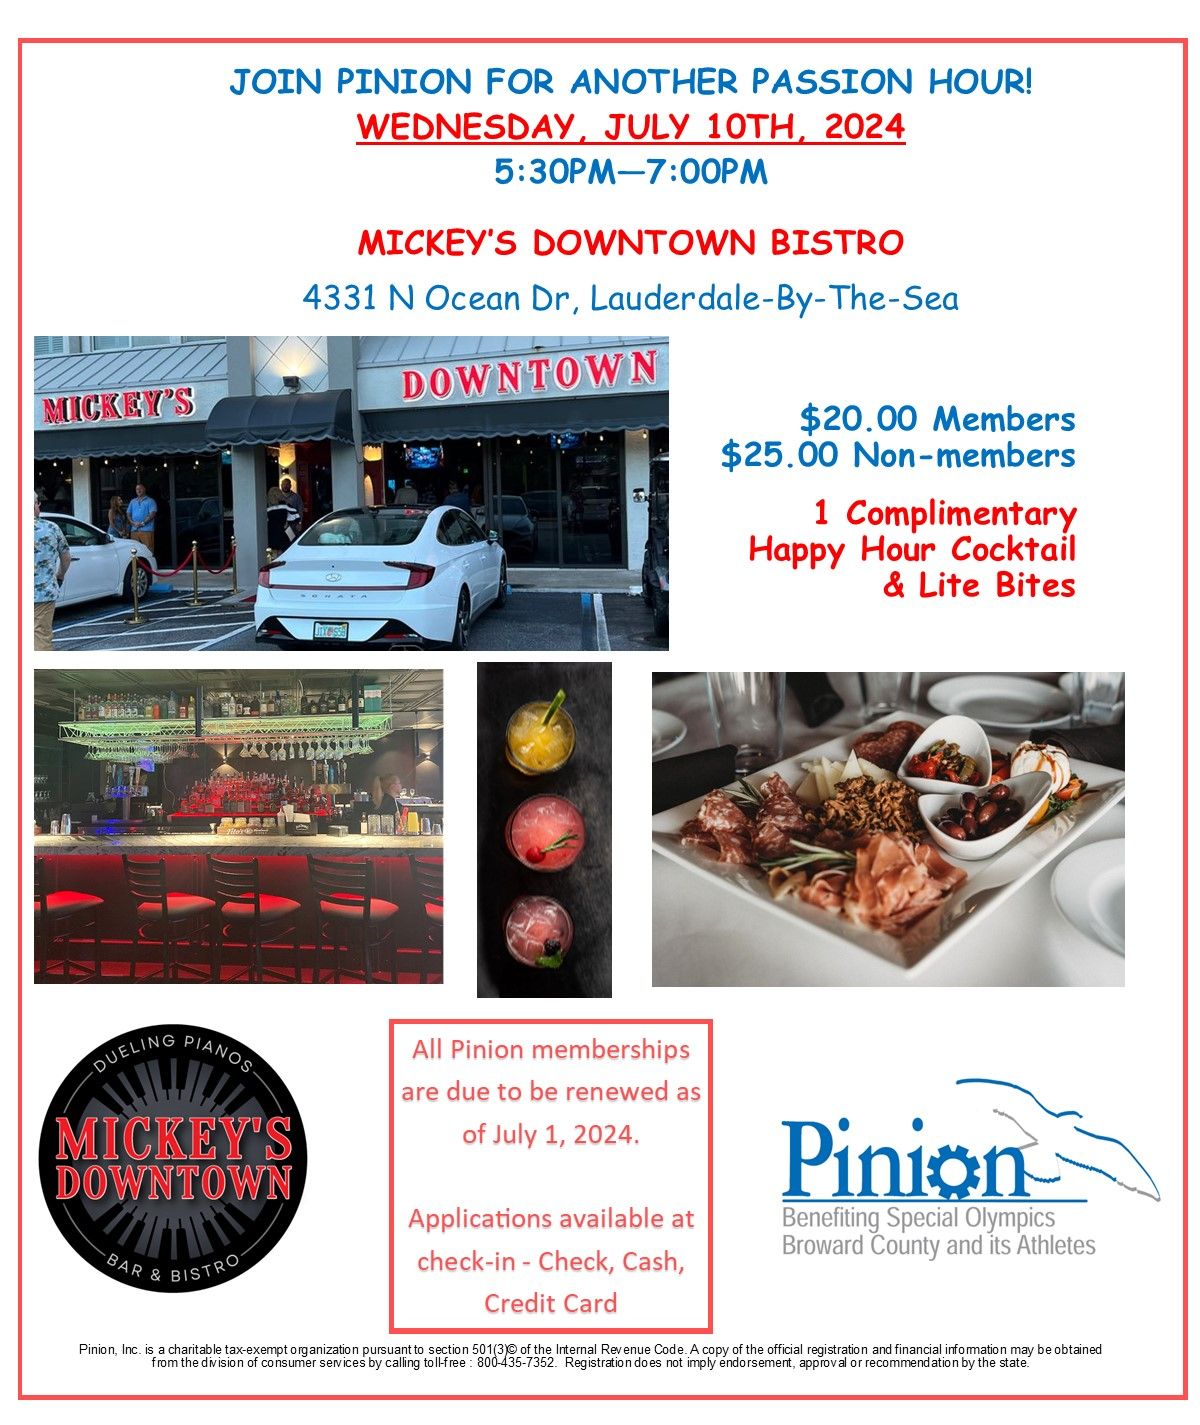 JOIN PINION AUGUST PASSION HOUR AT MICKEY\u2019S DOWNTOWN BISTRO